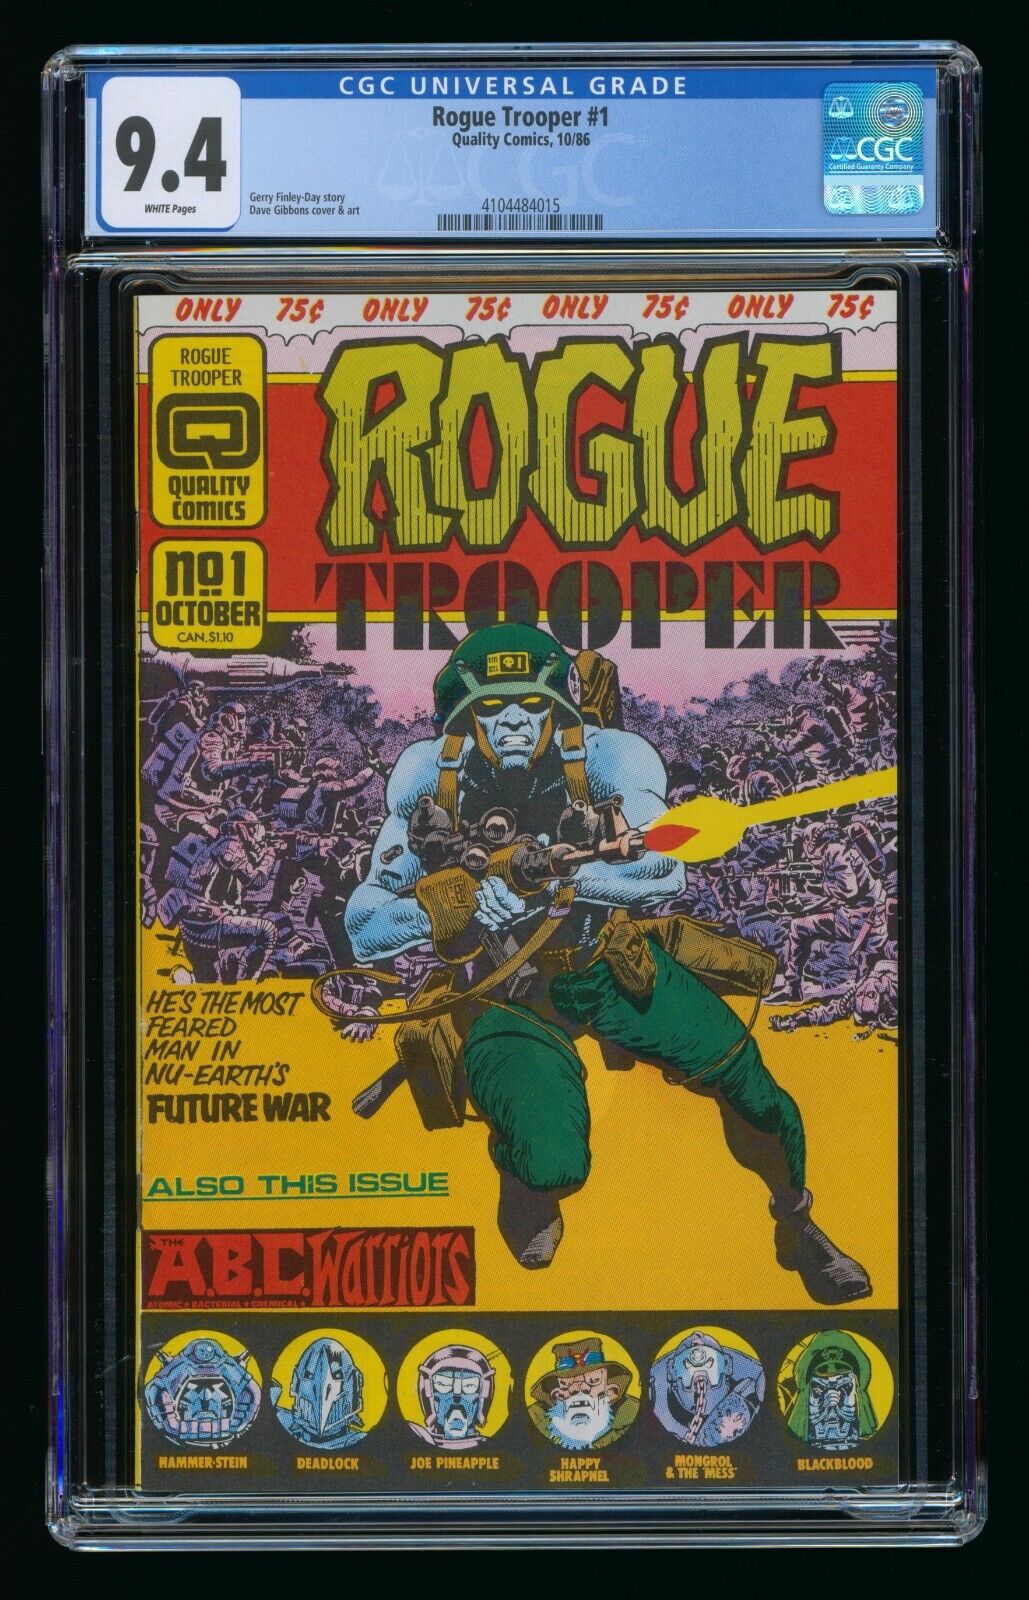 ROGUE TROOPER #1 (1986) CGC 9.4 QUALITY COMICS WHITE PAGES